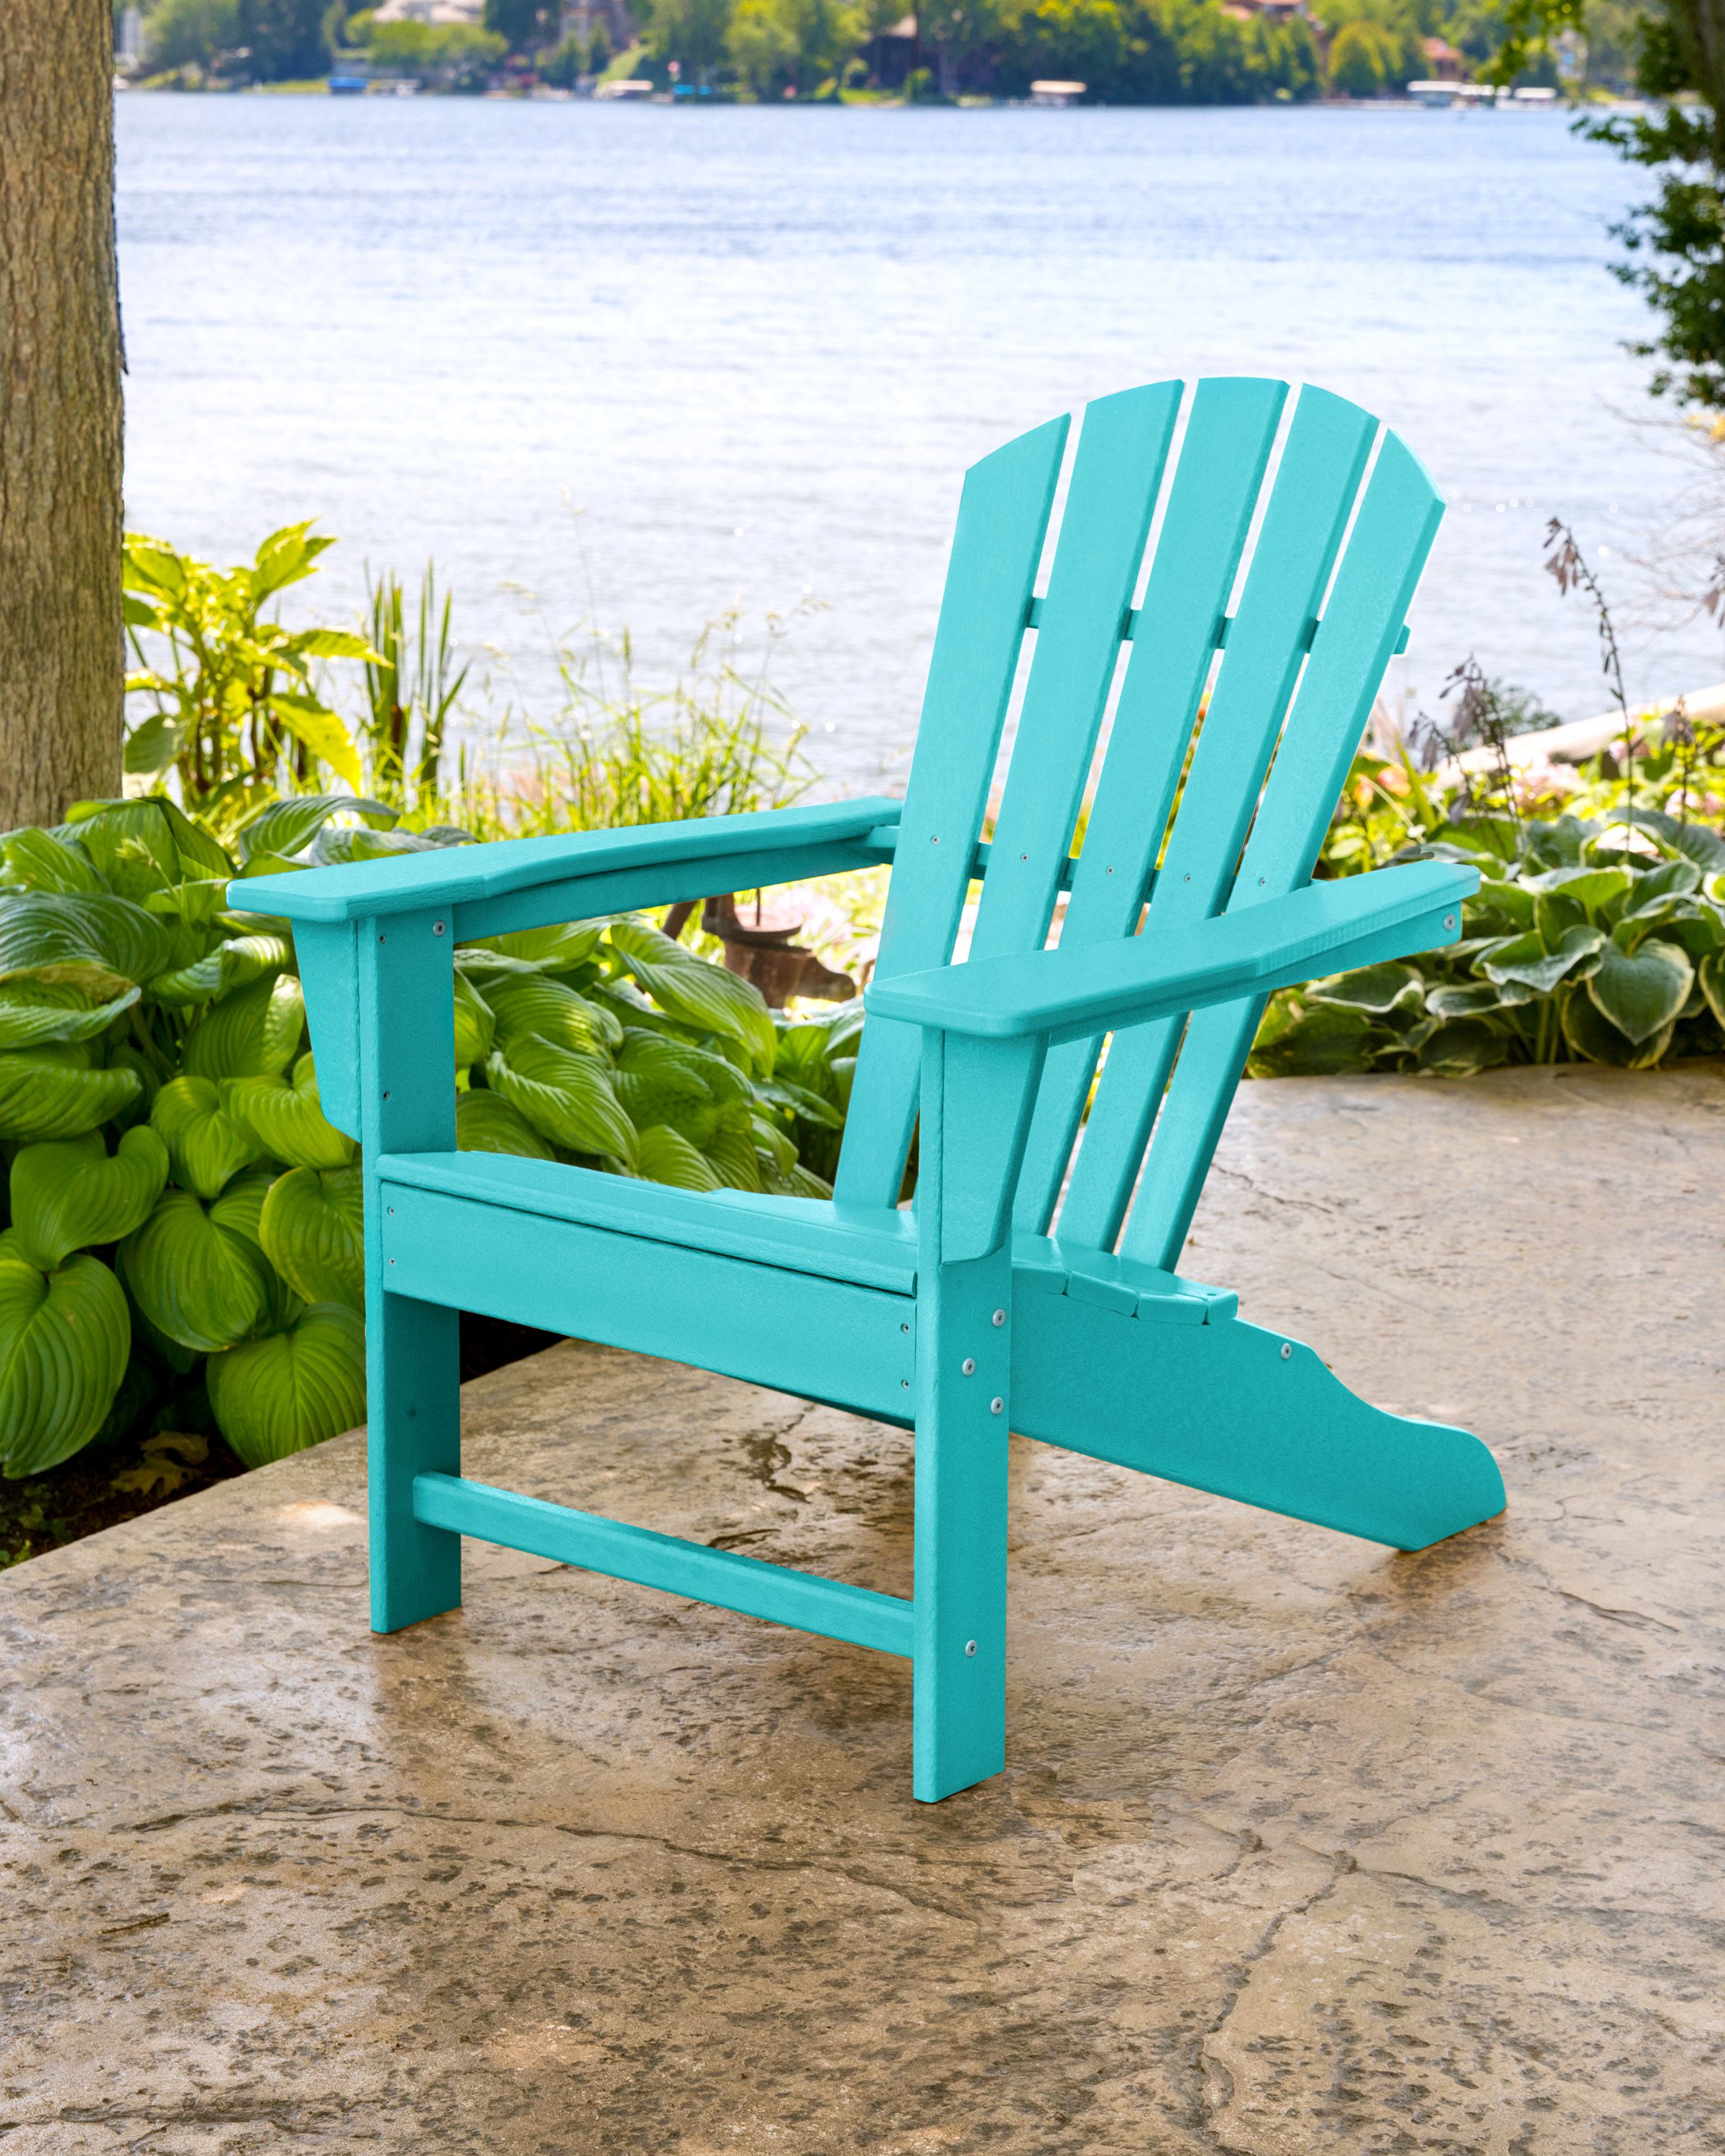 Better Homes & Gardens Turq Faux Wood Lakeport Adirondack Chair - image 1 of 2